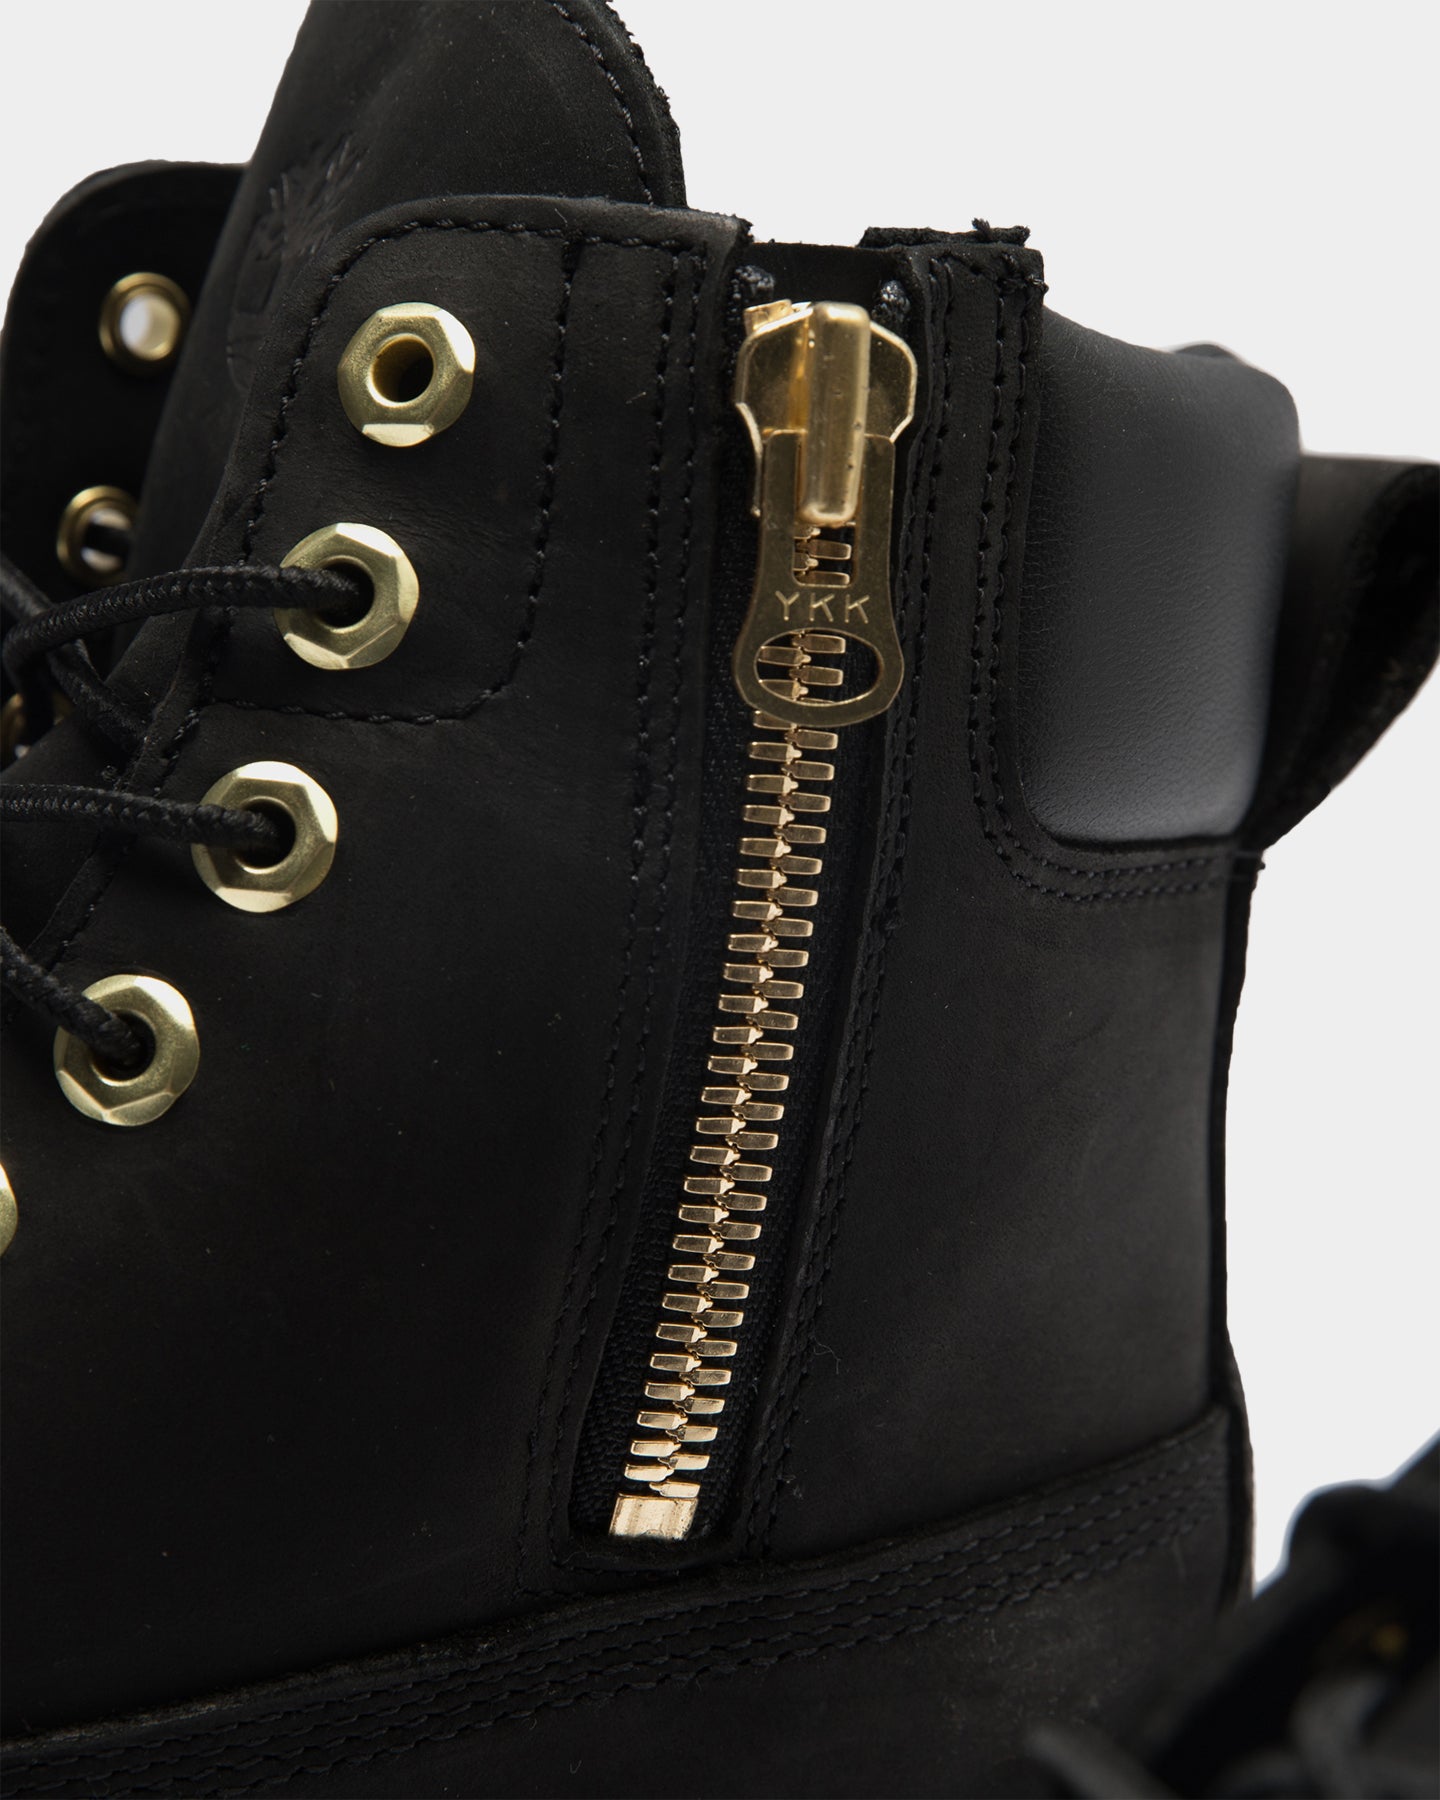 timberland black and gold boots